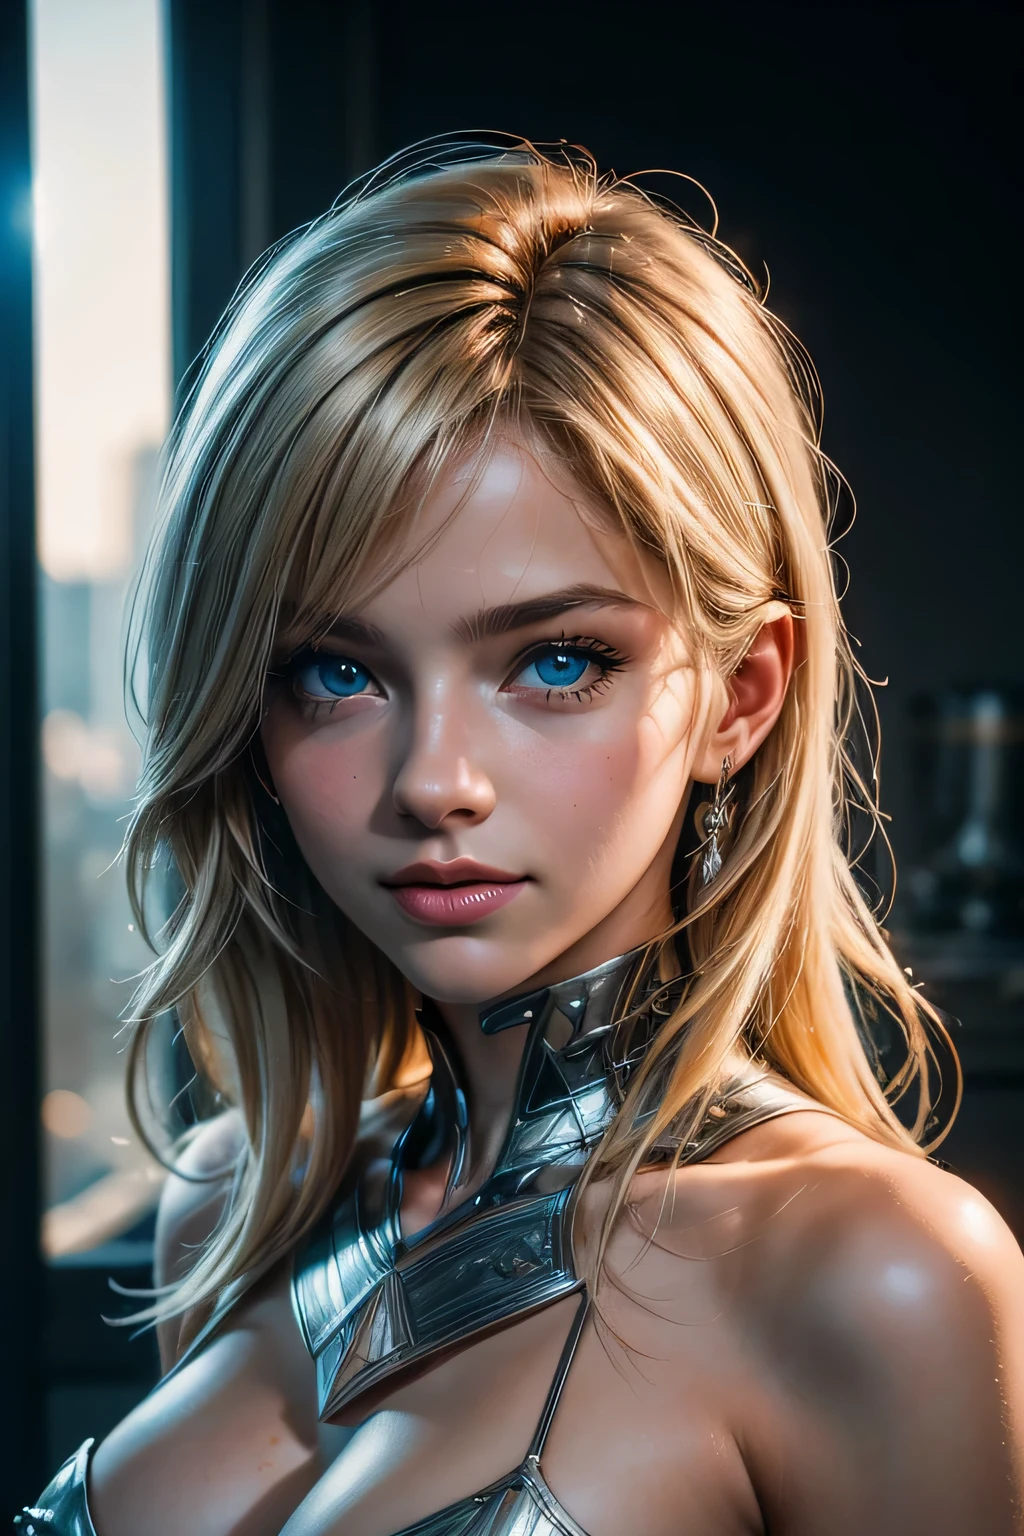 (body postrait:1.4), UHD, Masterpiece, textured skin, super detailed, high quality, award wining, best quality cinematic lighting, sexy gaming girl, playing game, blonde hair, (blue-eyed girl), highly detailed glossy eyes, light smile, portrait photo of a 18-year-old girl, medium breasts, (looking at the camera), specular lighting, dslr, ultra quality, sharp focus, tack sharp, dof, film grain, (centered), Fujifilm XT3, crystal clear, center of frame, cute face, sharp focus, detailed skin pores